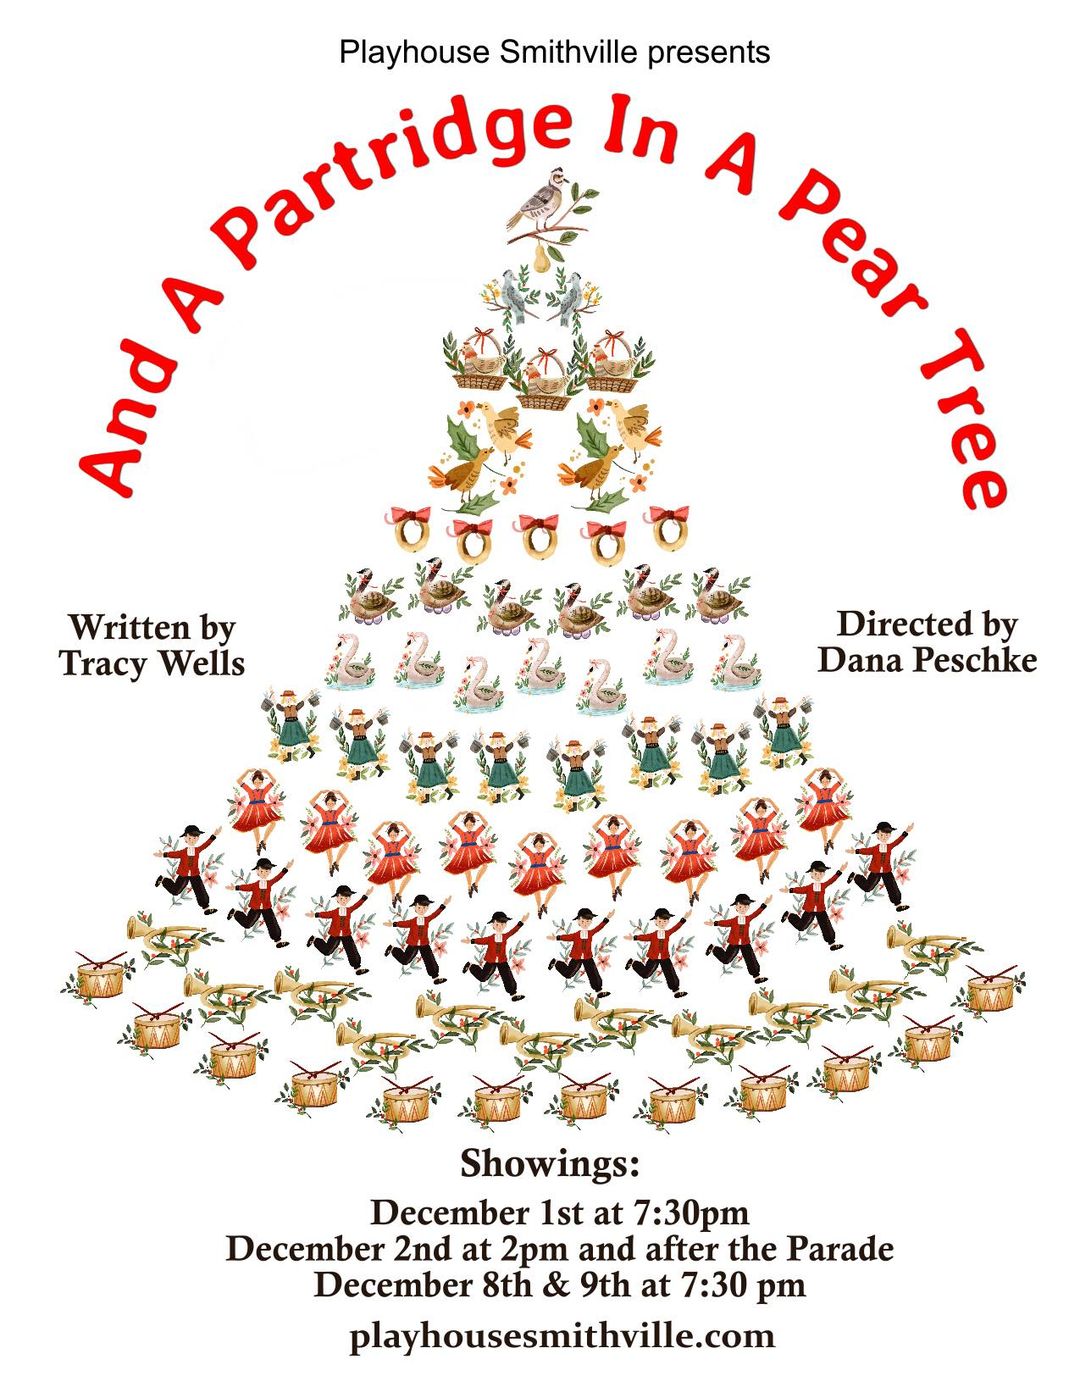 And a Partridge in a Pear Tree by Playhouse Smithville